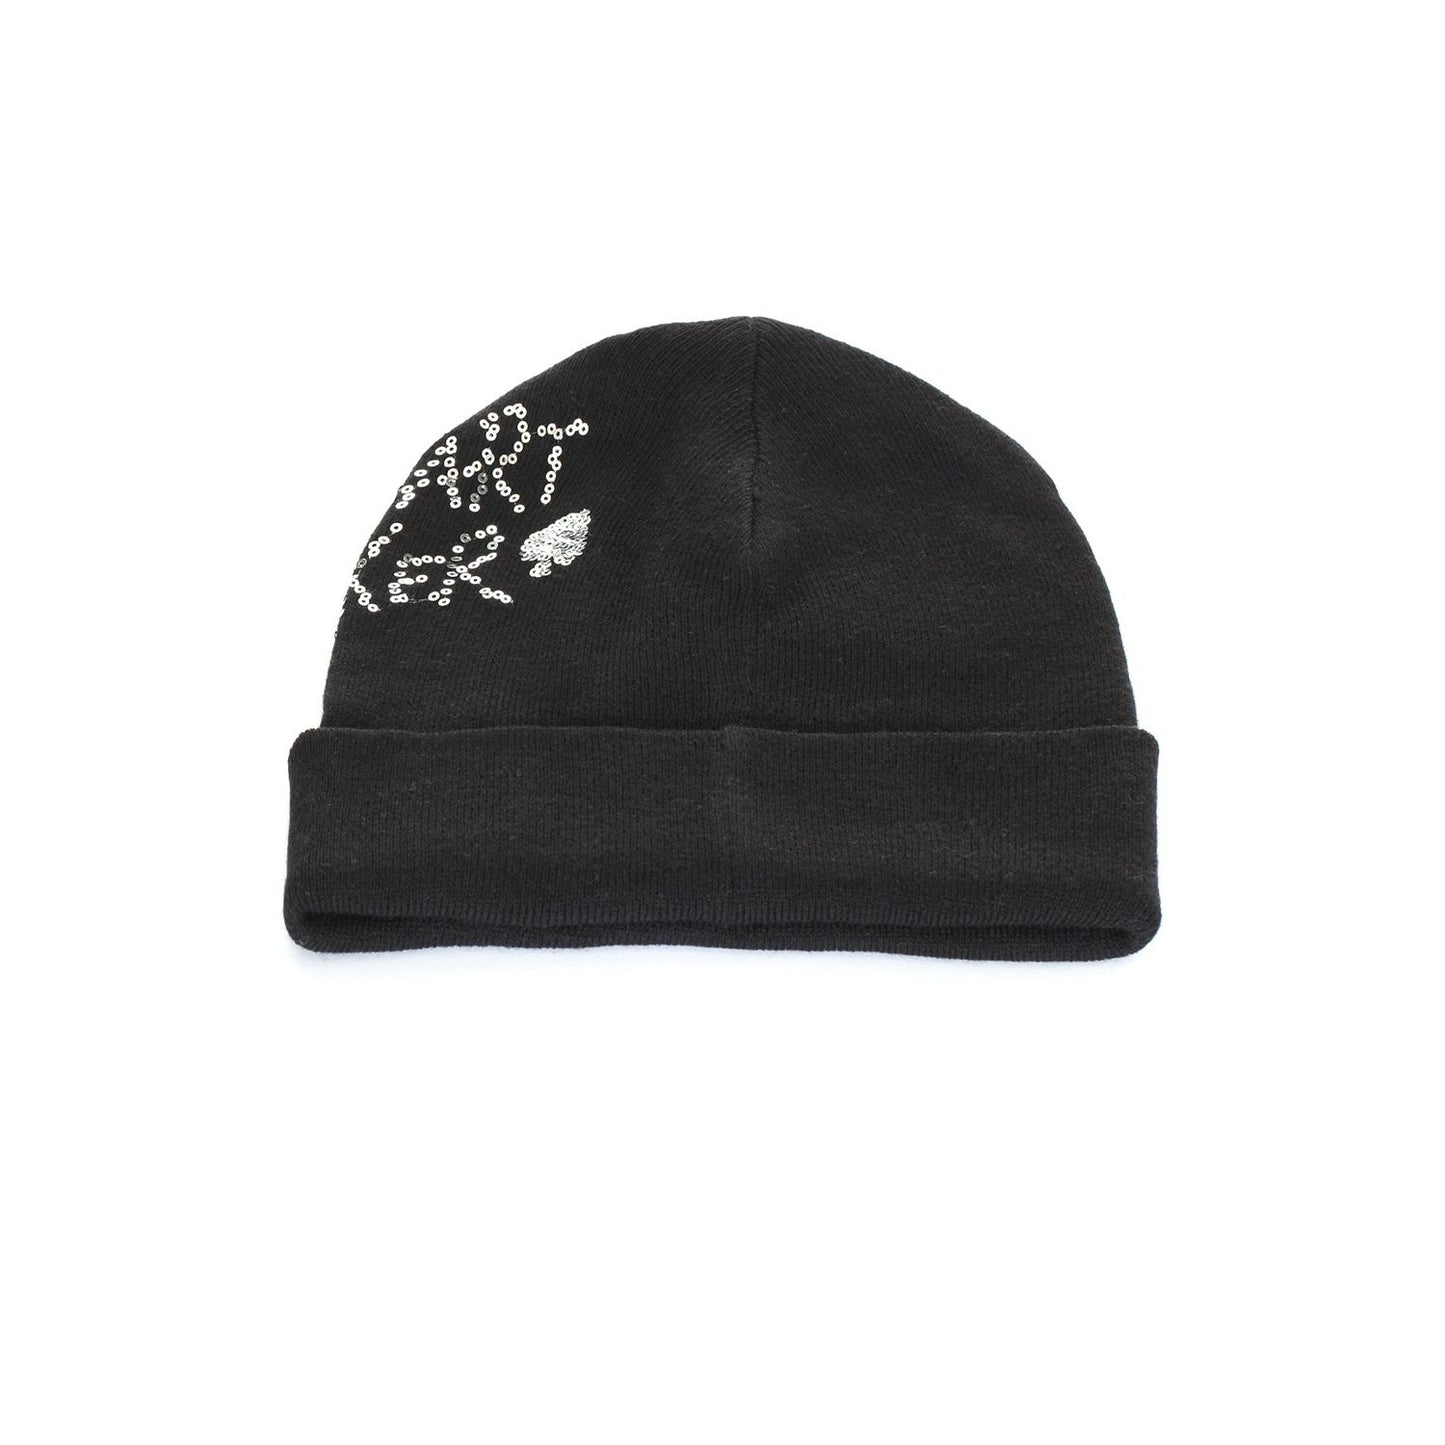 Imperfect Chic Knitted Beanie in Timeless Black